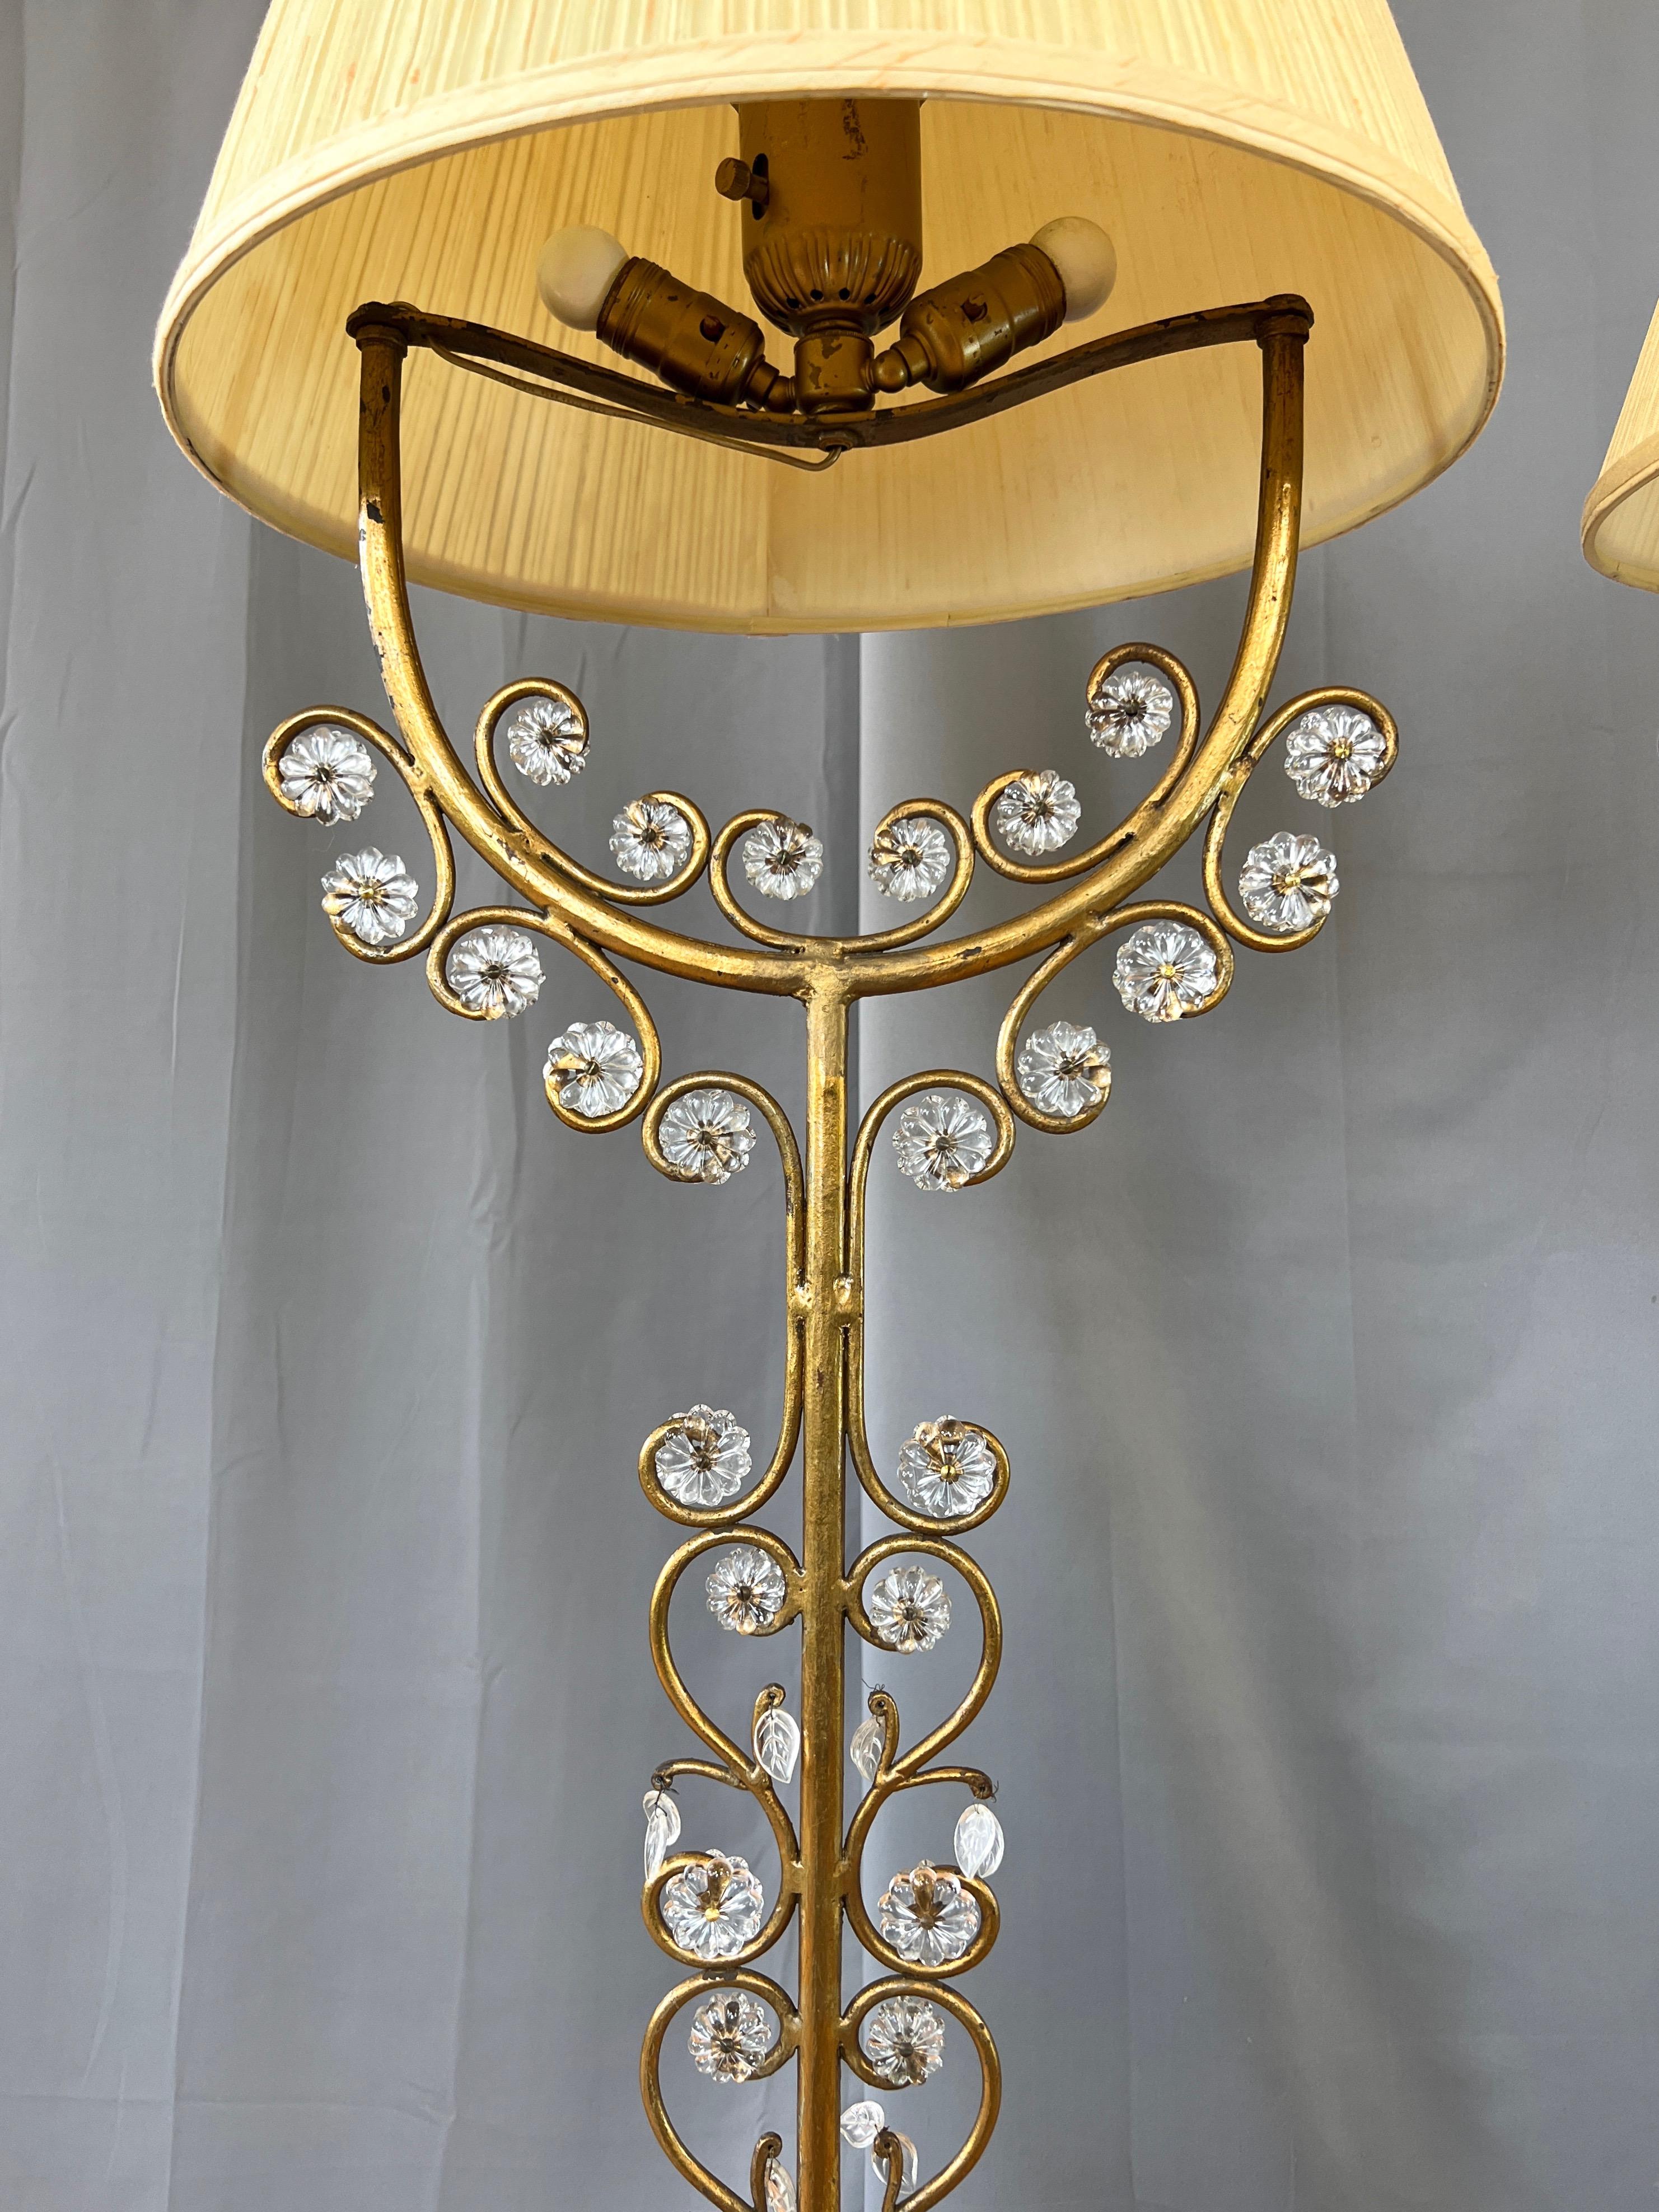 Metal Pair of Italian Gilt Wrought Iron Floor Lamps with Glass Florets & Leaves, 1950s For Sale